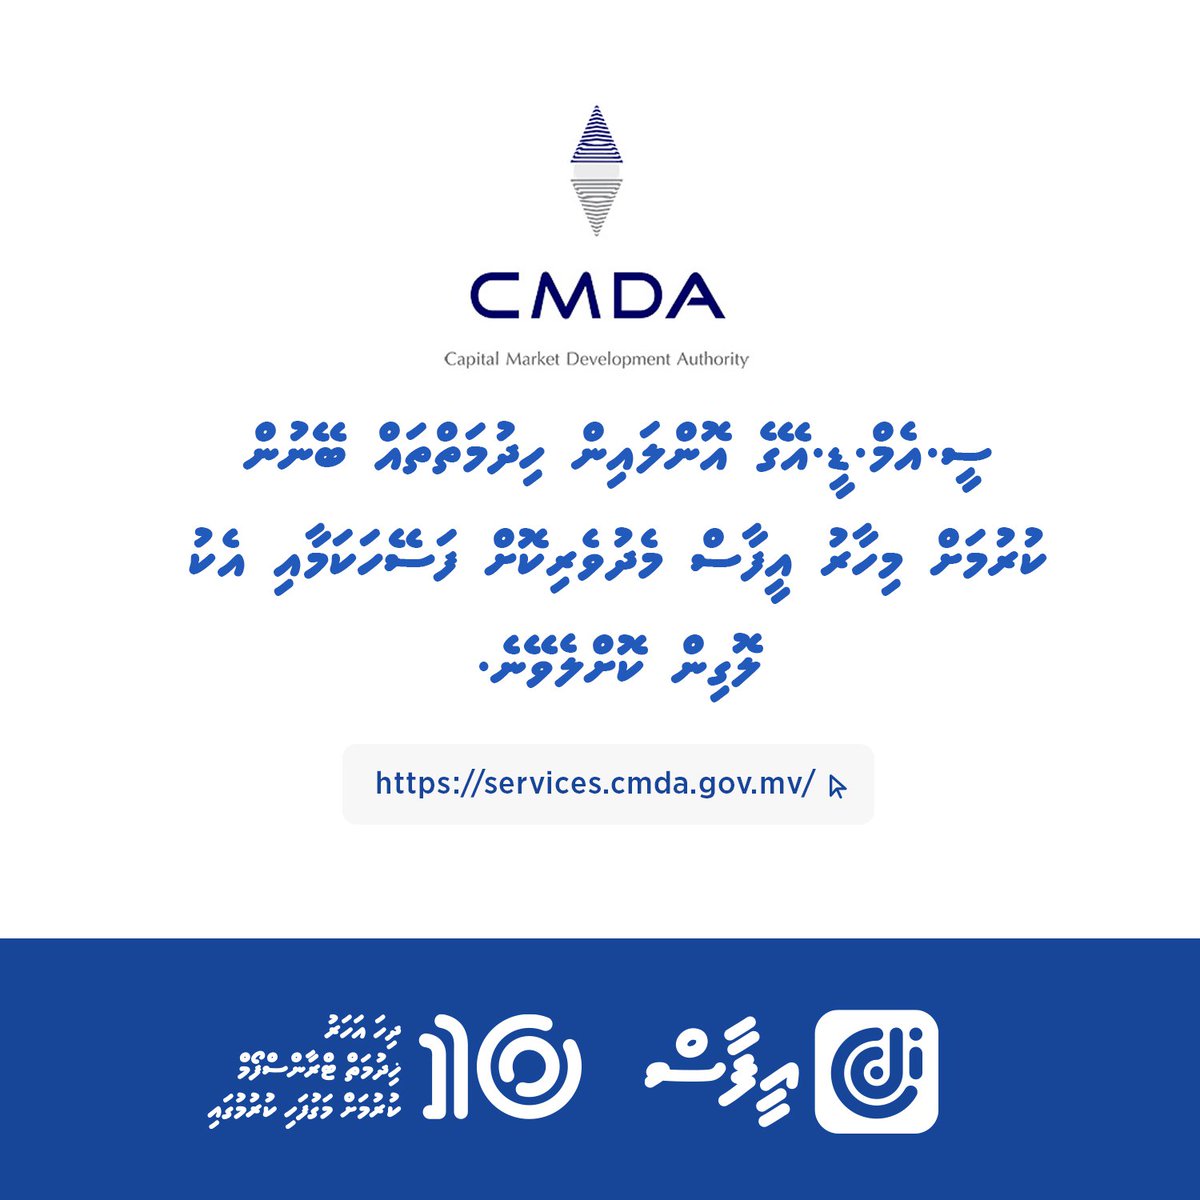 We are excited to annouce that you can now conveniently and safely login to CMDA Online Services with your eFaas.

Link: services.cmda.gov.mv

#efaas #digitalidentity #DigitalMaldives #TransformGovernment